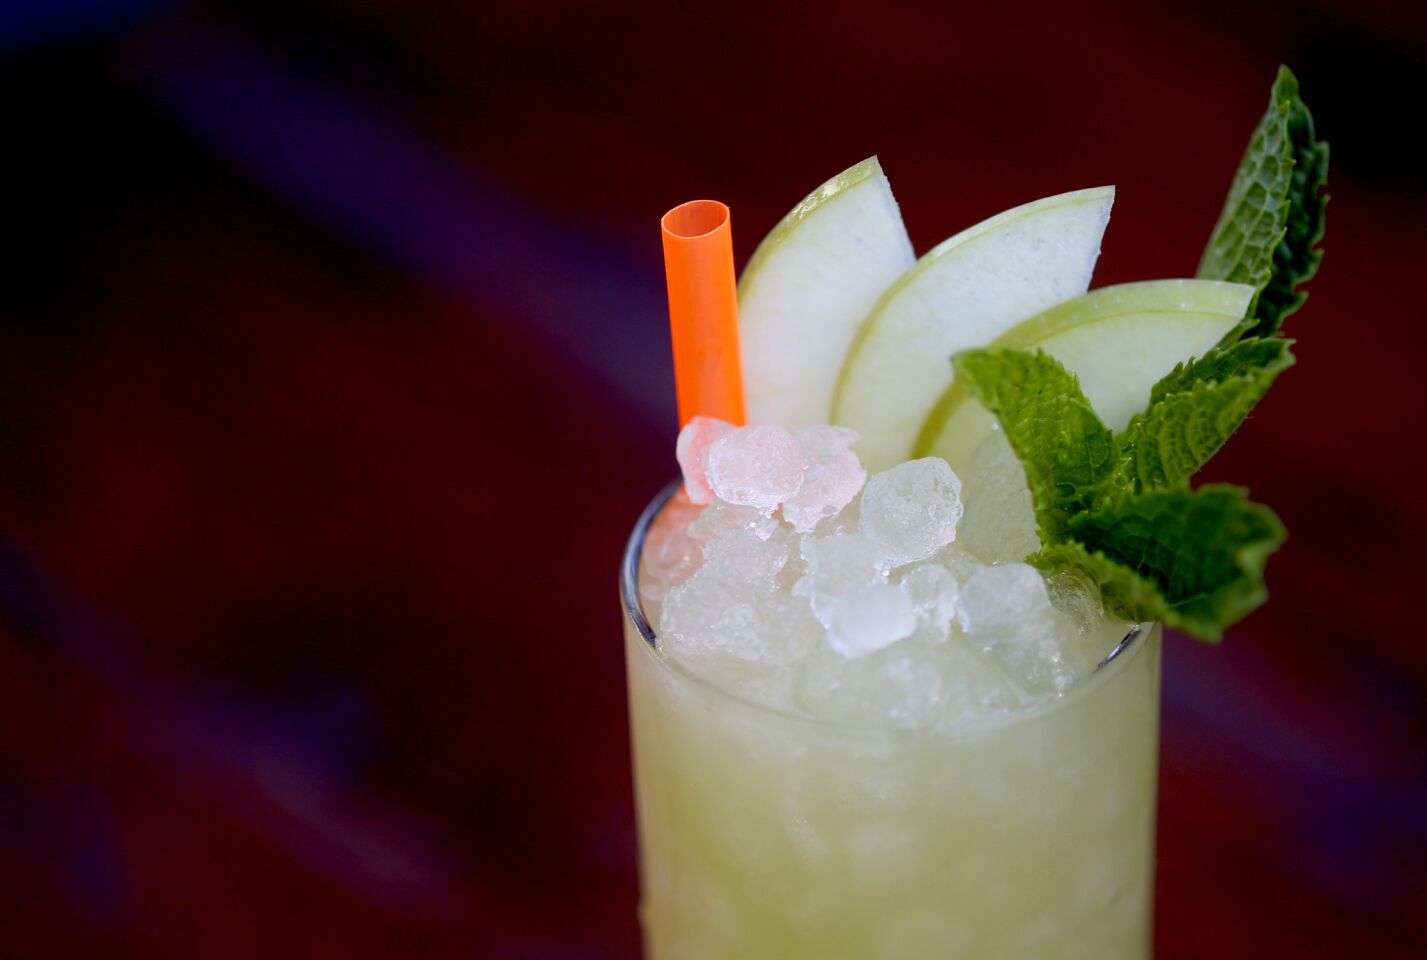 The verde drink has cucumber, green apple, lime, cilantro, celery gin, pear brandy and fino sherry.